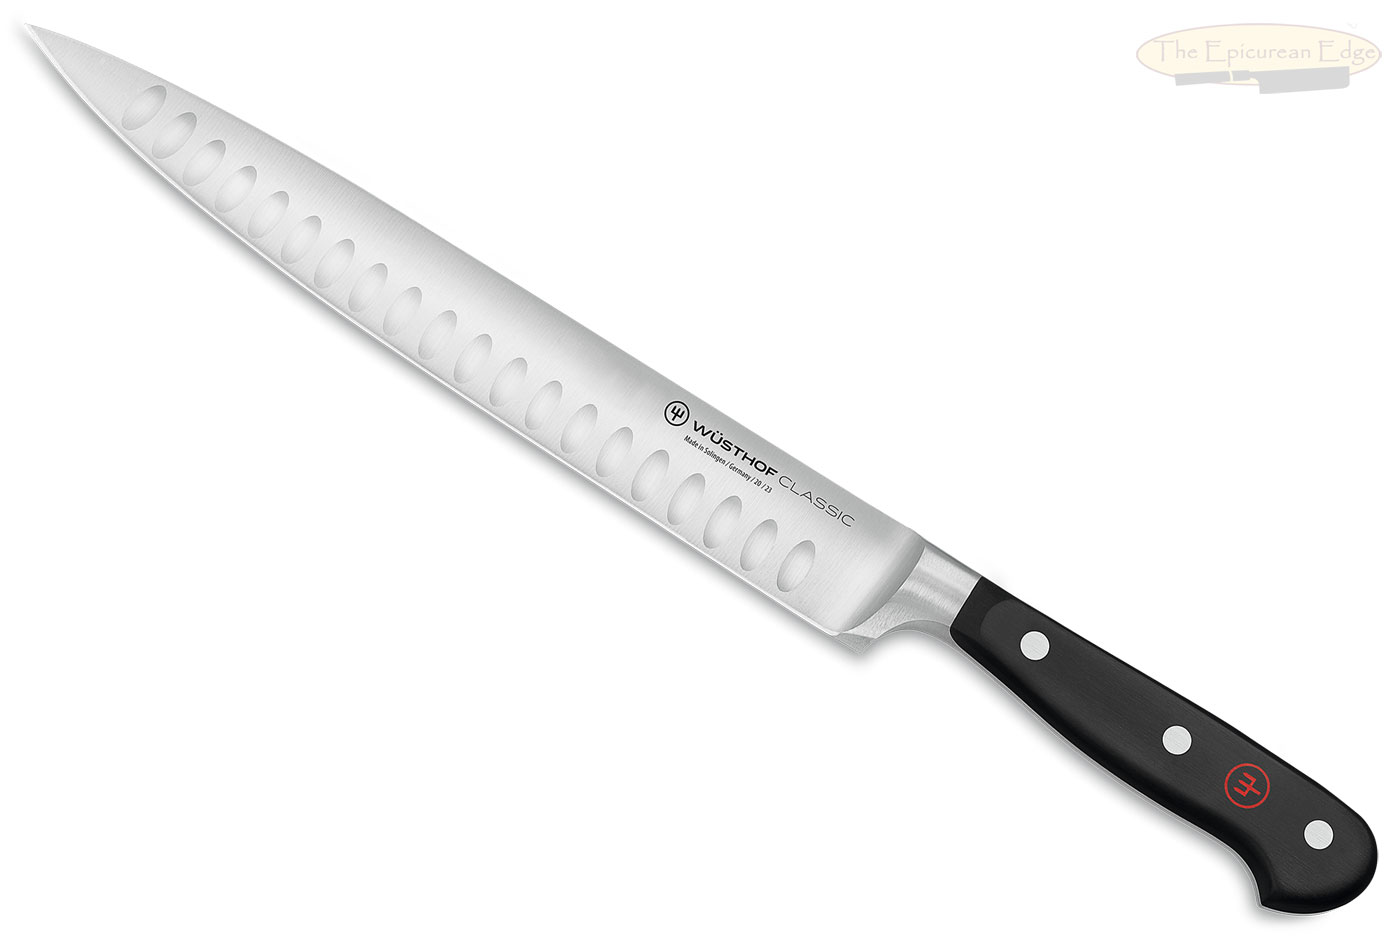 Wusthof-Trident Classic Carving Knife - 9 in, Hollow Edge (1040100823)